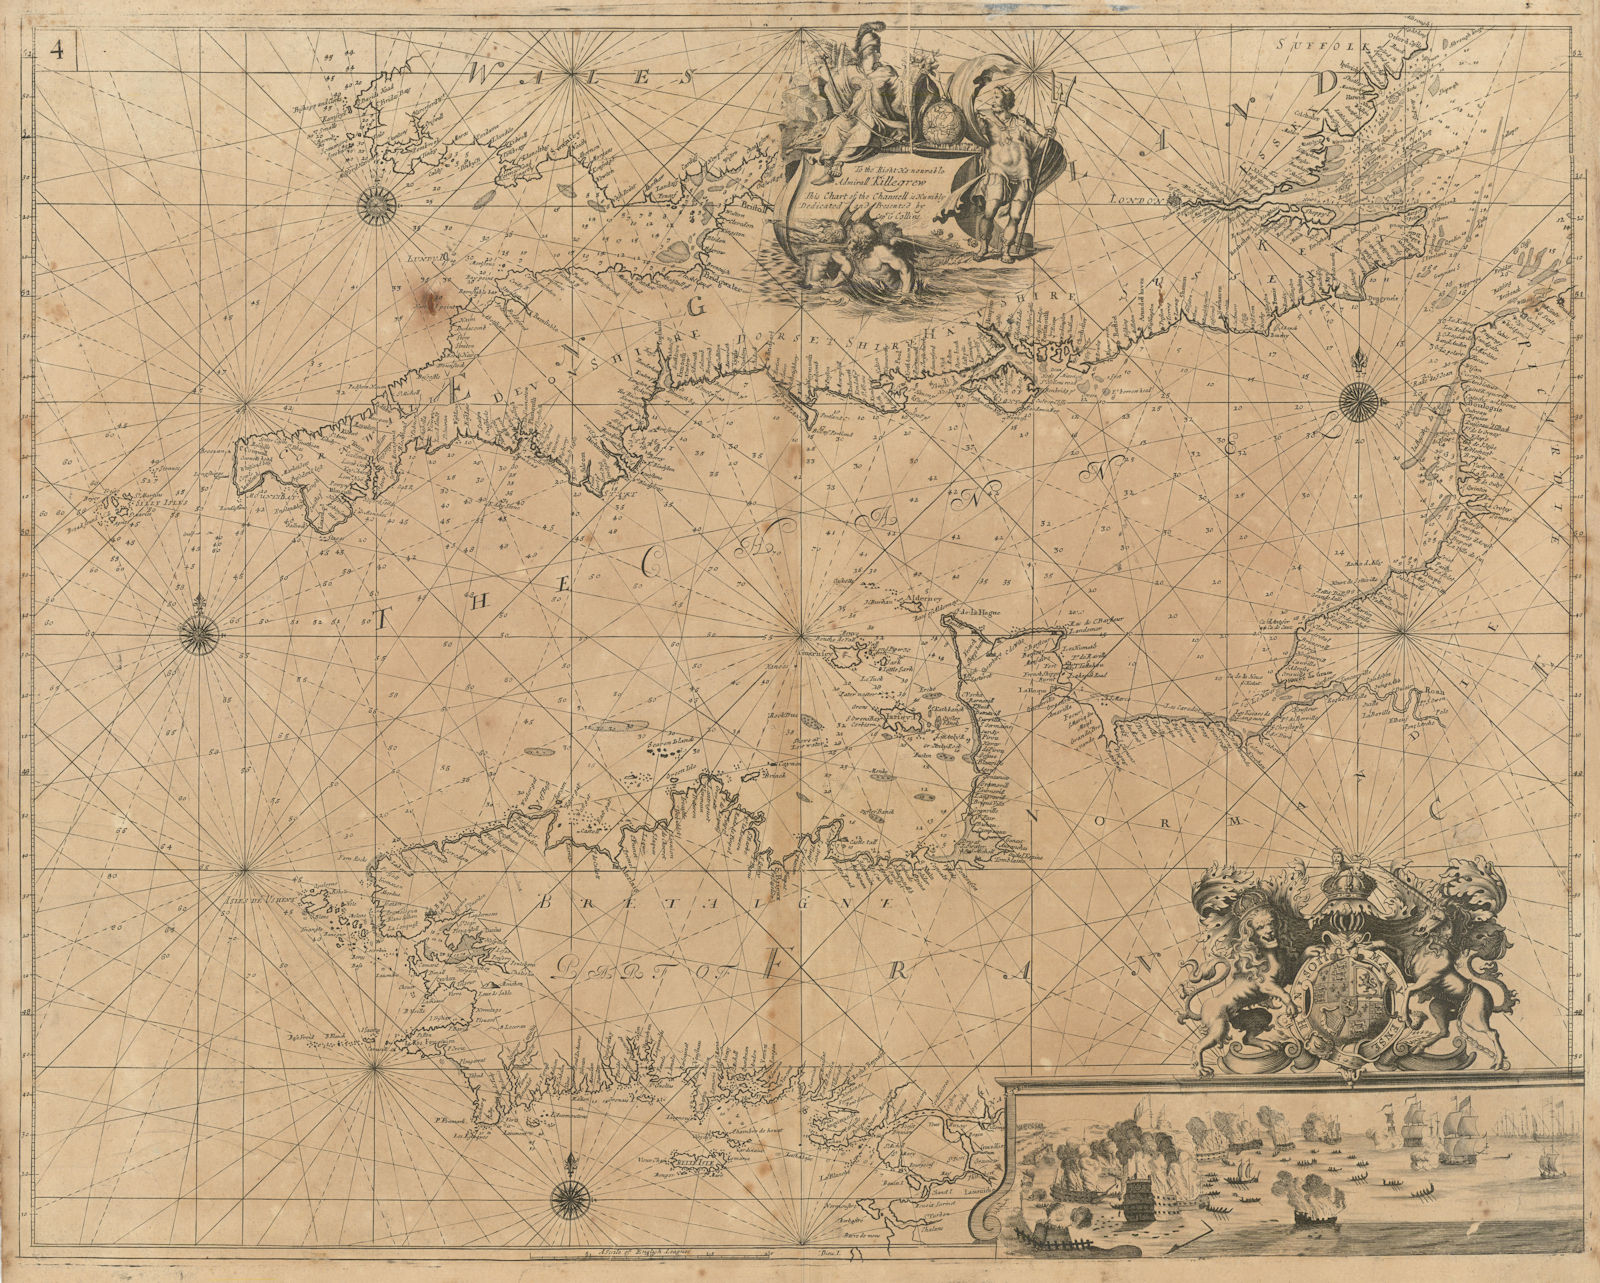 English Channel. Southern England & Wales. Brittany Normandy. COLLINS 1693 map